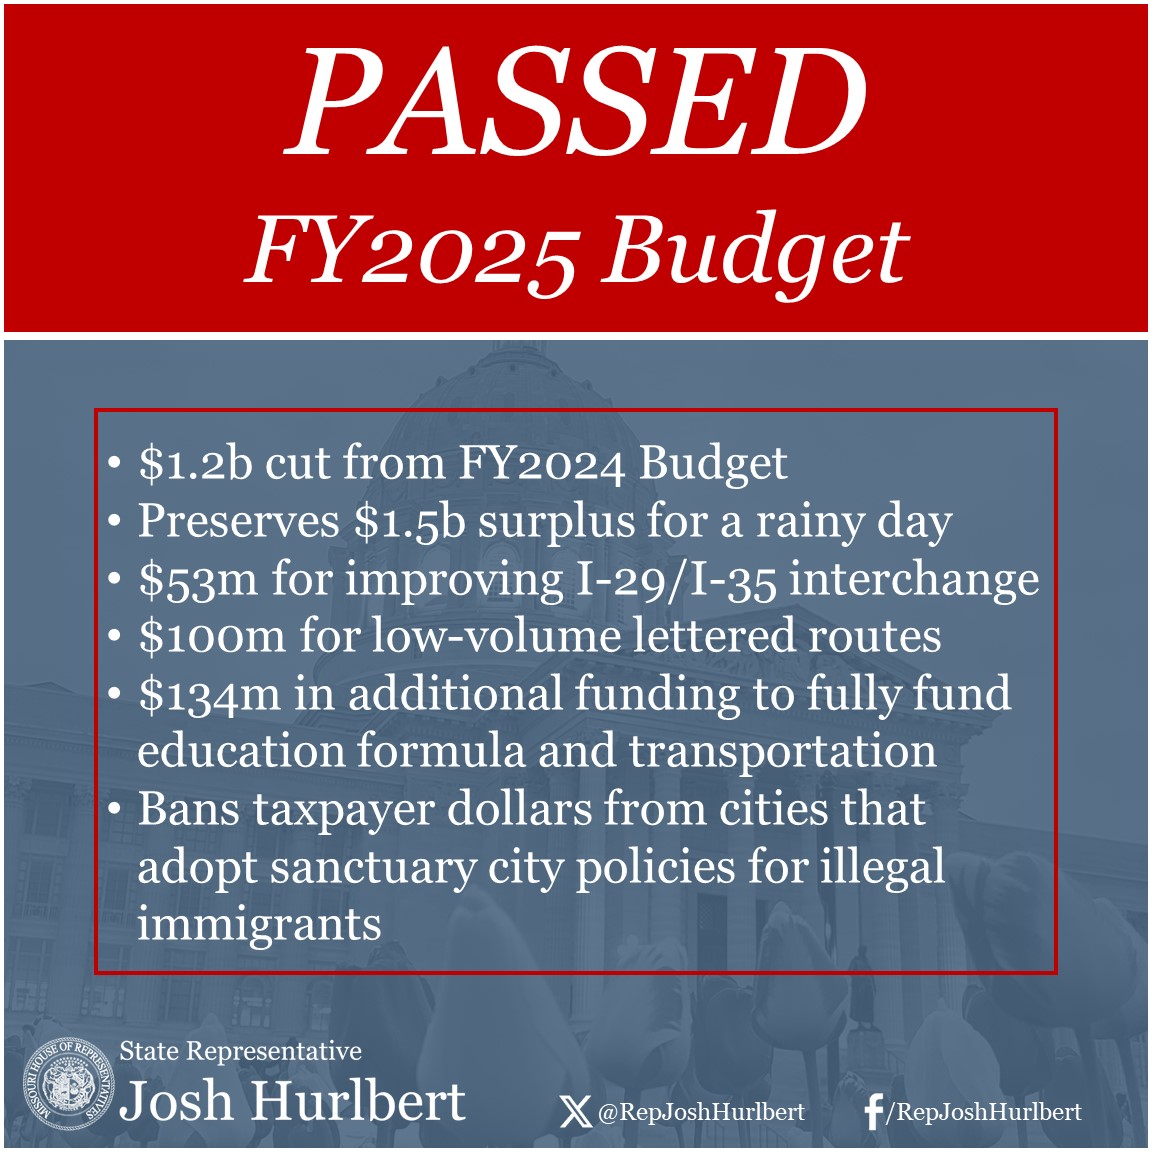 Today, we passed a fiscally responsible budget that, for the first time since I've been here, actually cuts spending from the year before. Some highlights: #moleg